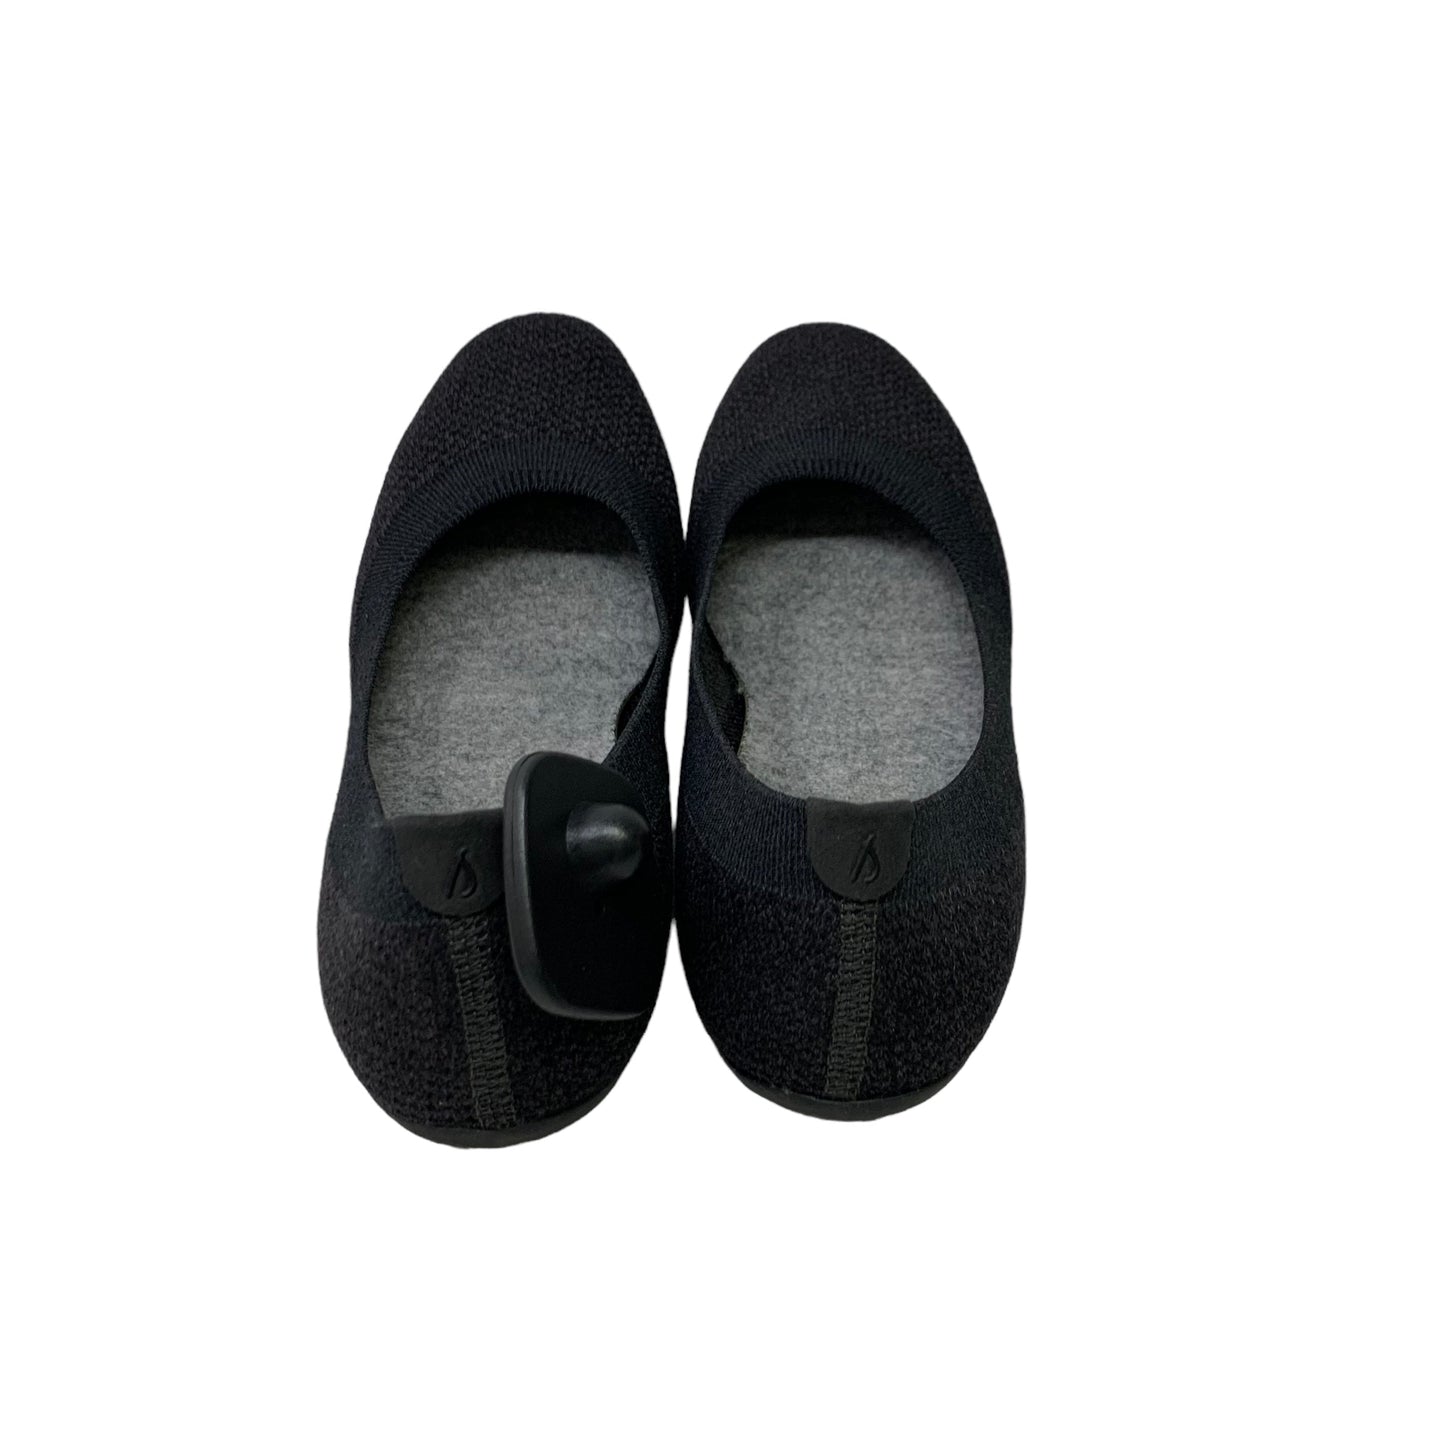 Shoes Flats By Allbirds  Size: 8.5